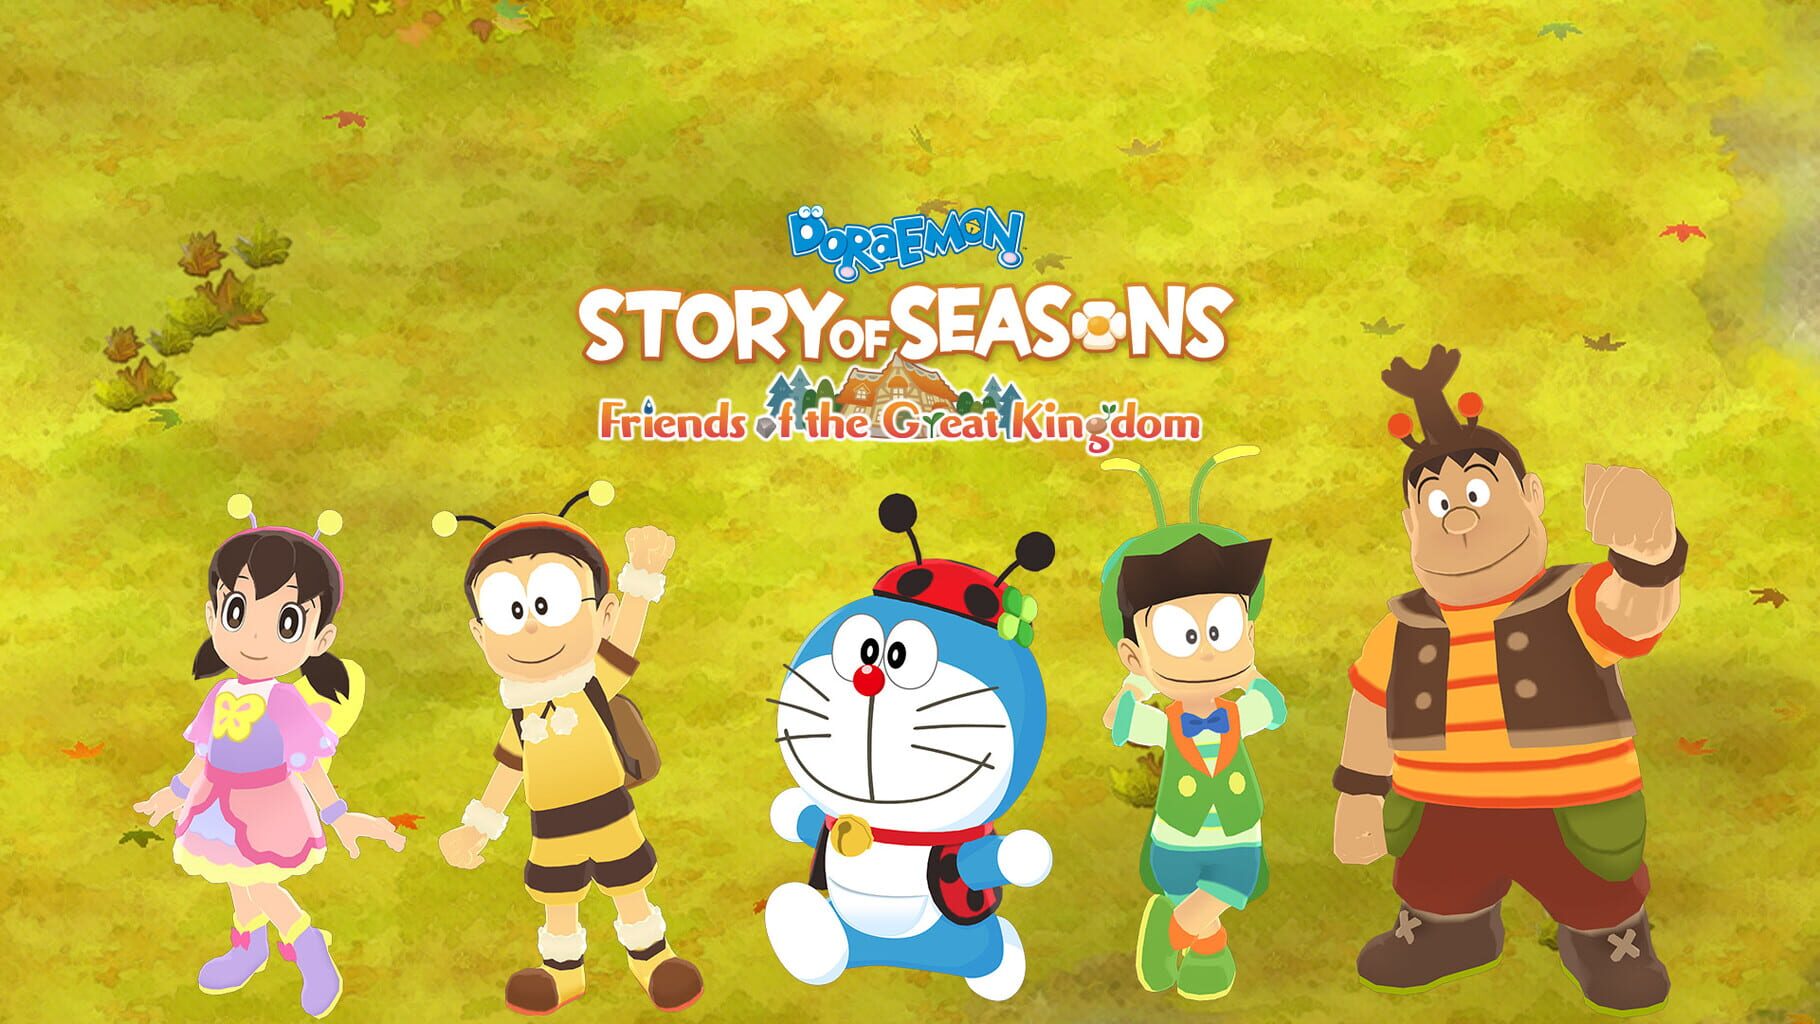 Doraemon Story of Seasons: Friends of the Great Kingdom - The Life of Insects artwork